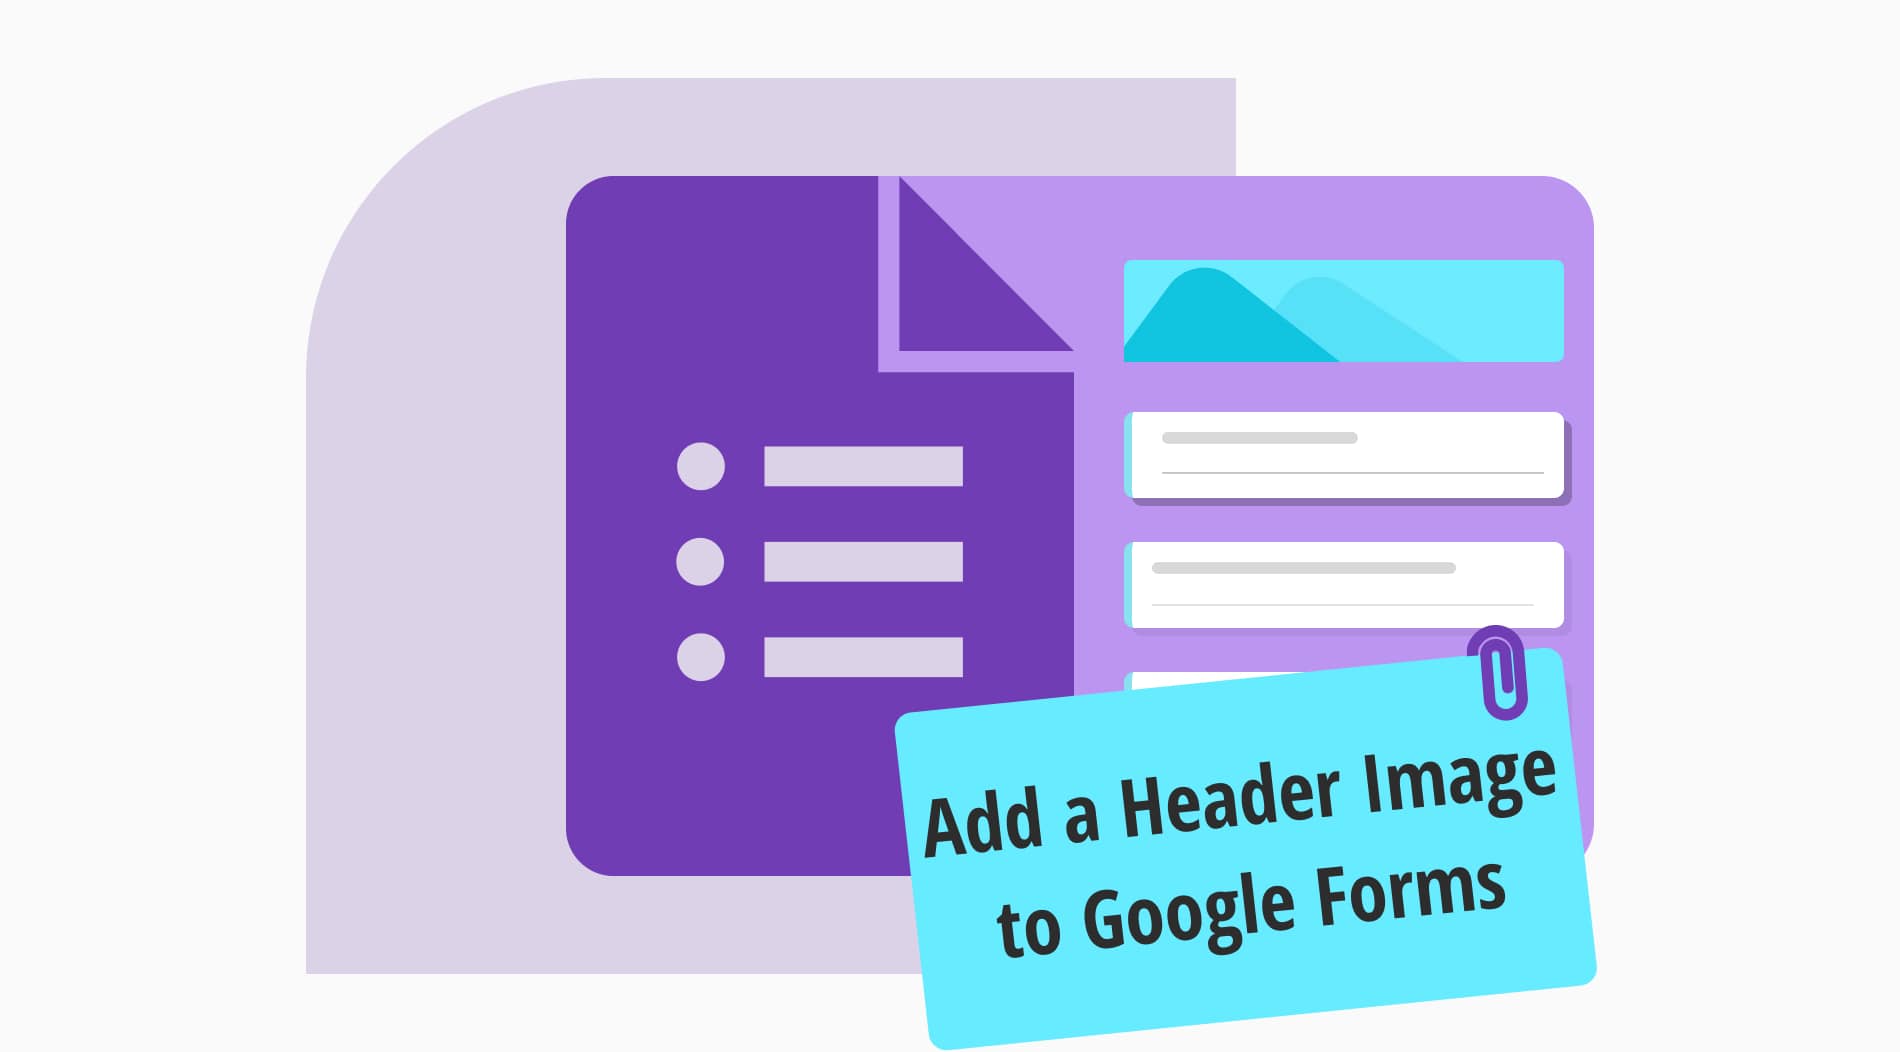 Simple Steps: Can you add a header image to Google Forms?